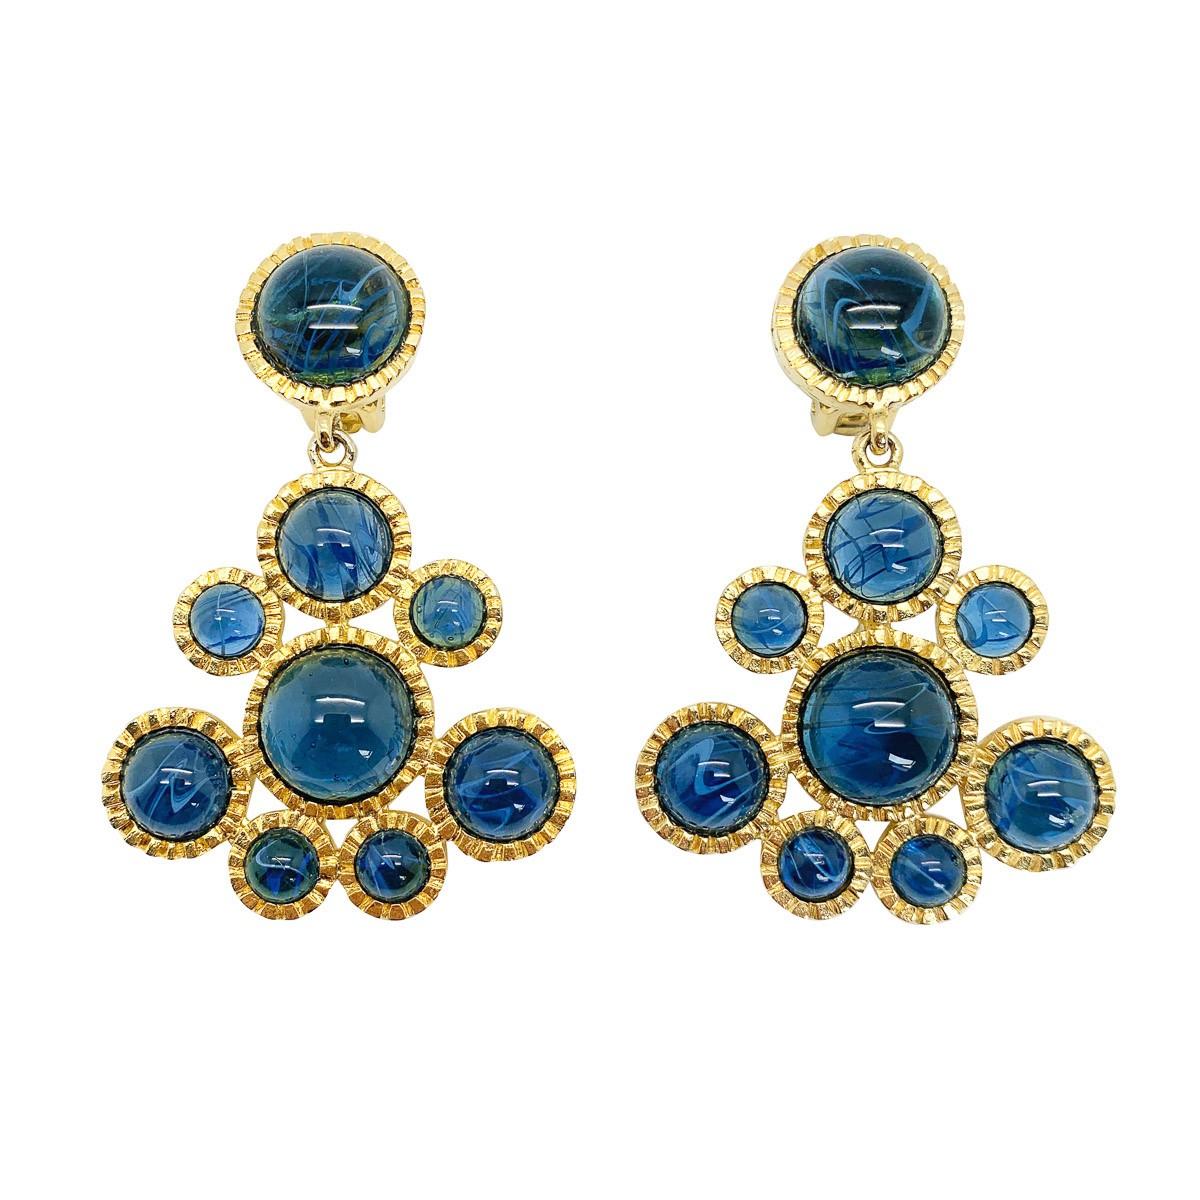 An outstanding pair of vintage KJL Sapphire earrings oozing glamour and style. Featuring a wonderfully designed crimped gold mount of statement proportion. Set to perfection with exquisite stones - large cabochon sapphire blue with a 'flawed'